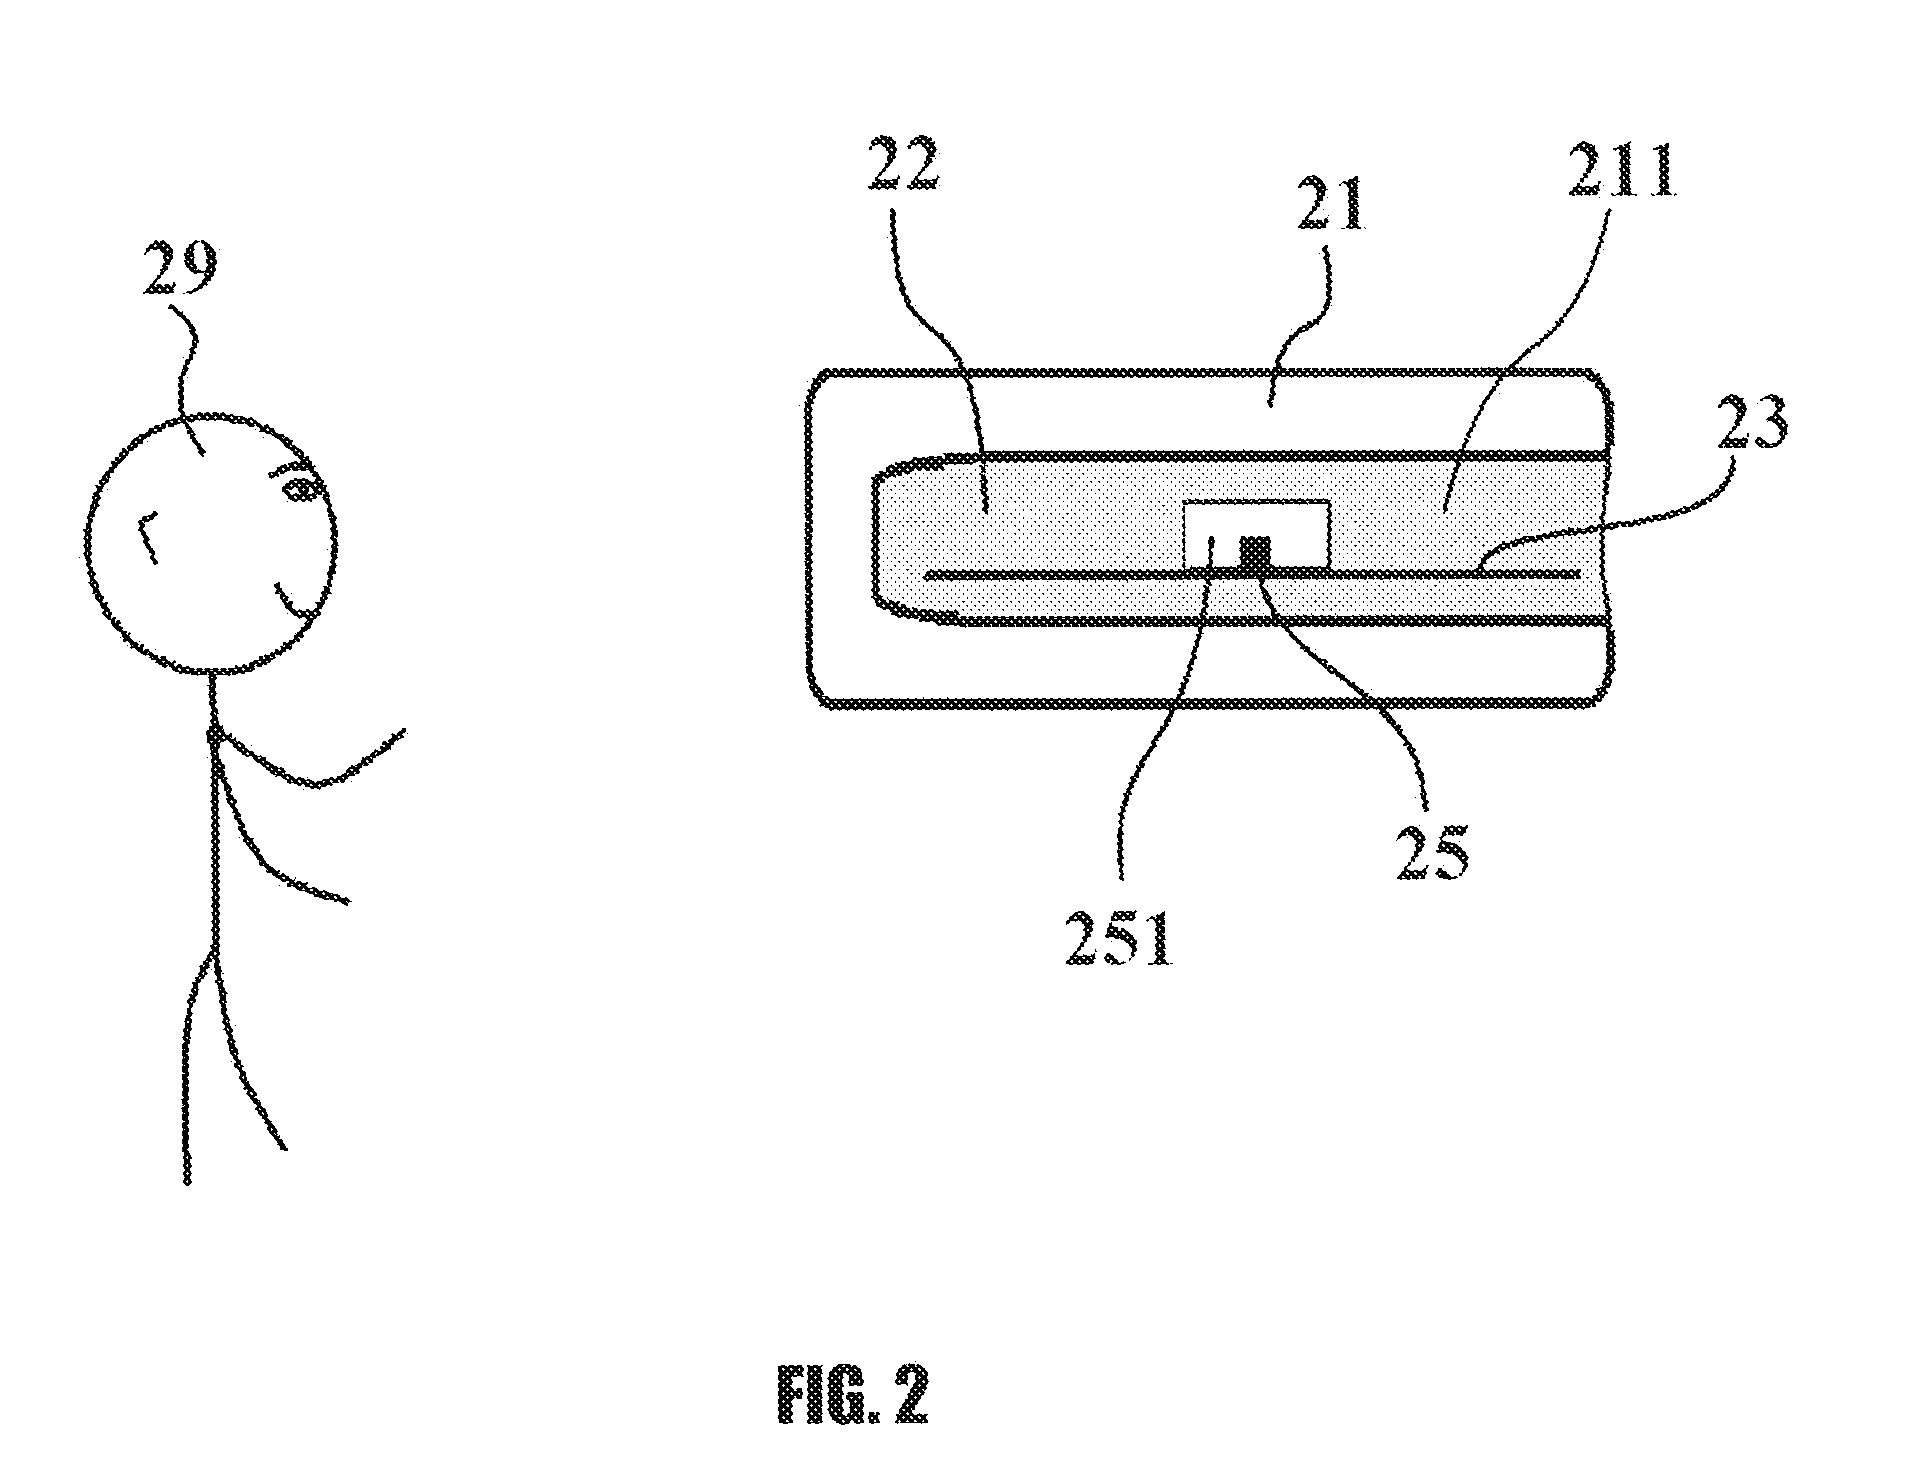 Lighting Article Comprising Embedded LED Strip and Method Thereof